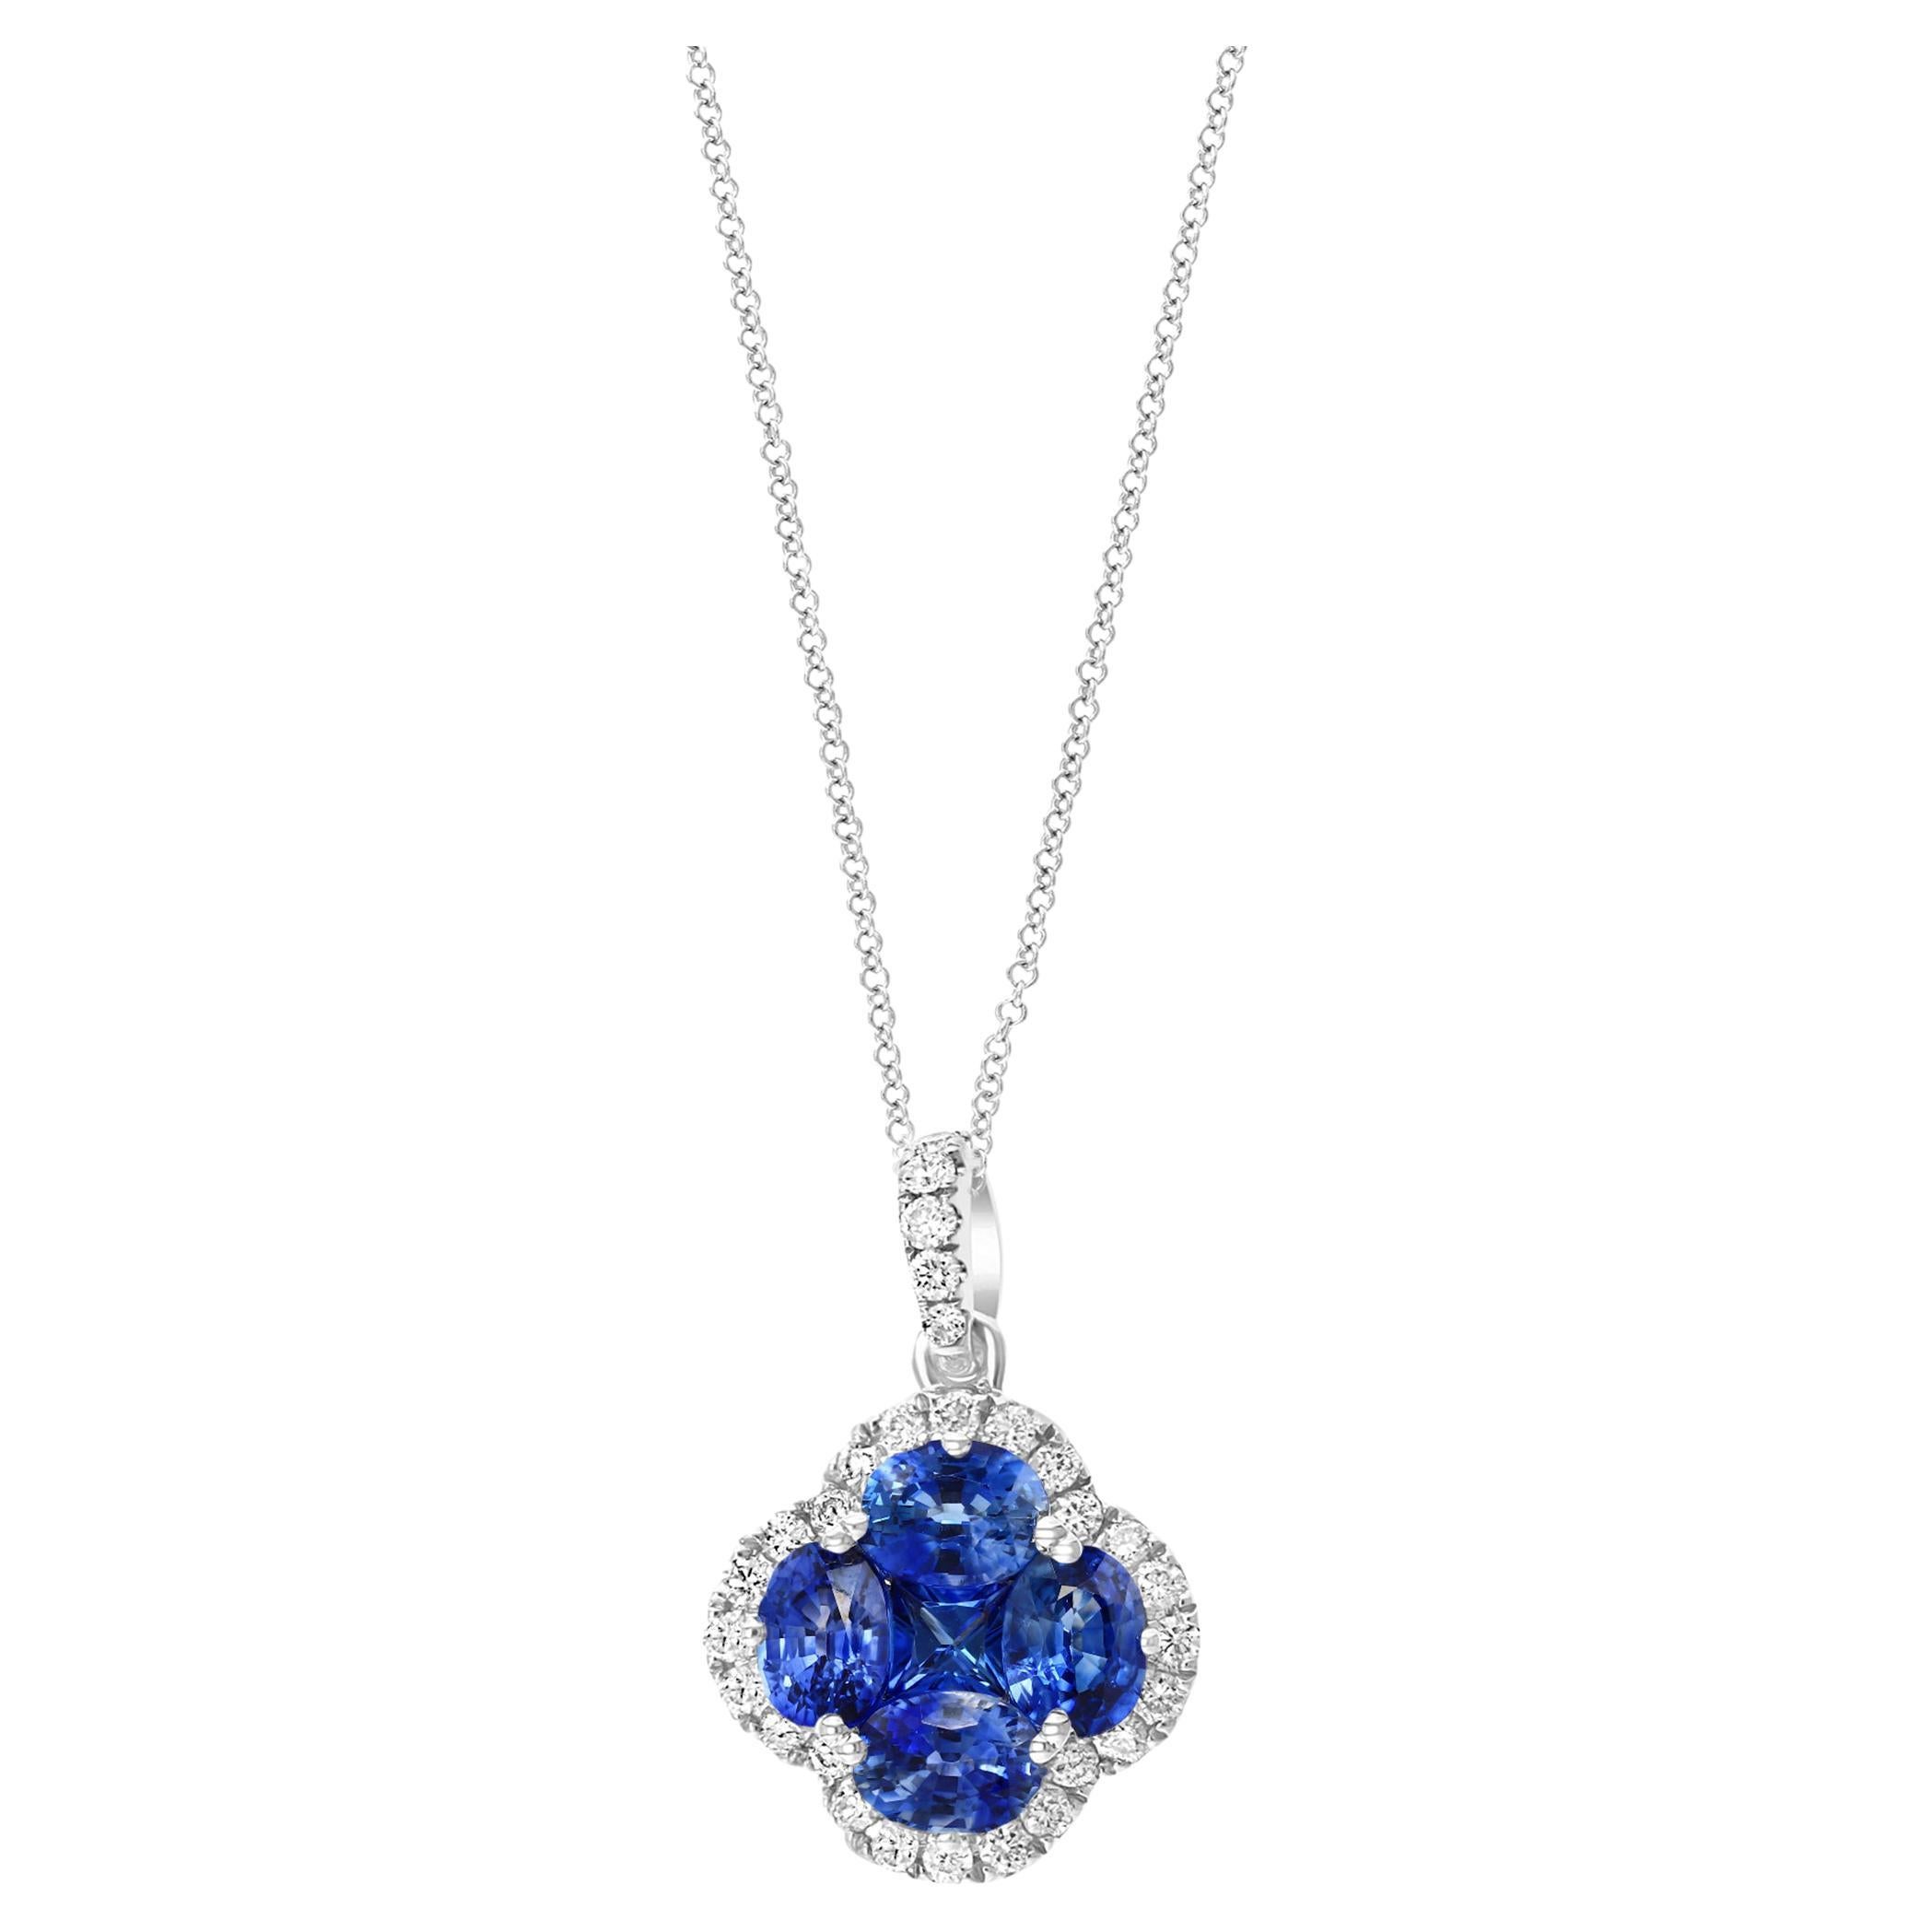 1.33 Carat Oval Cut Blue Sapphire and Diamond Pendant Necklace in 18K White Gold For Sale